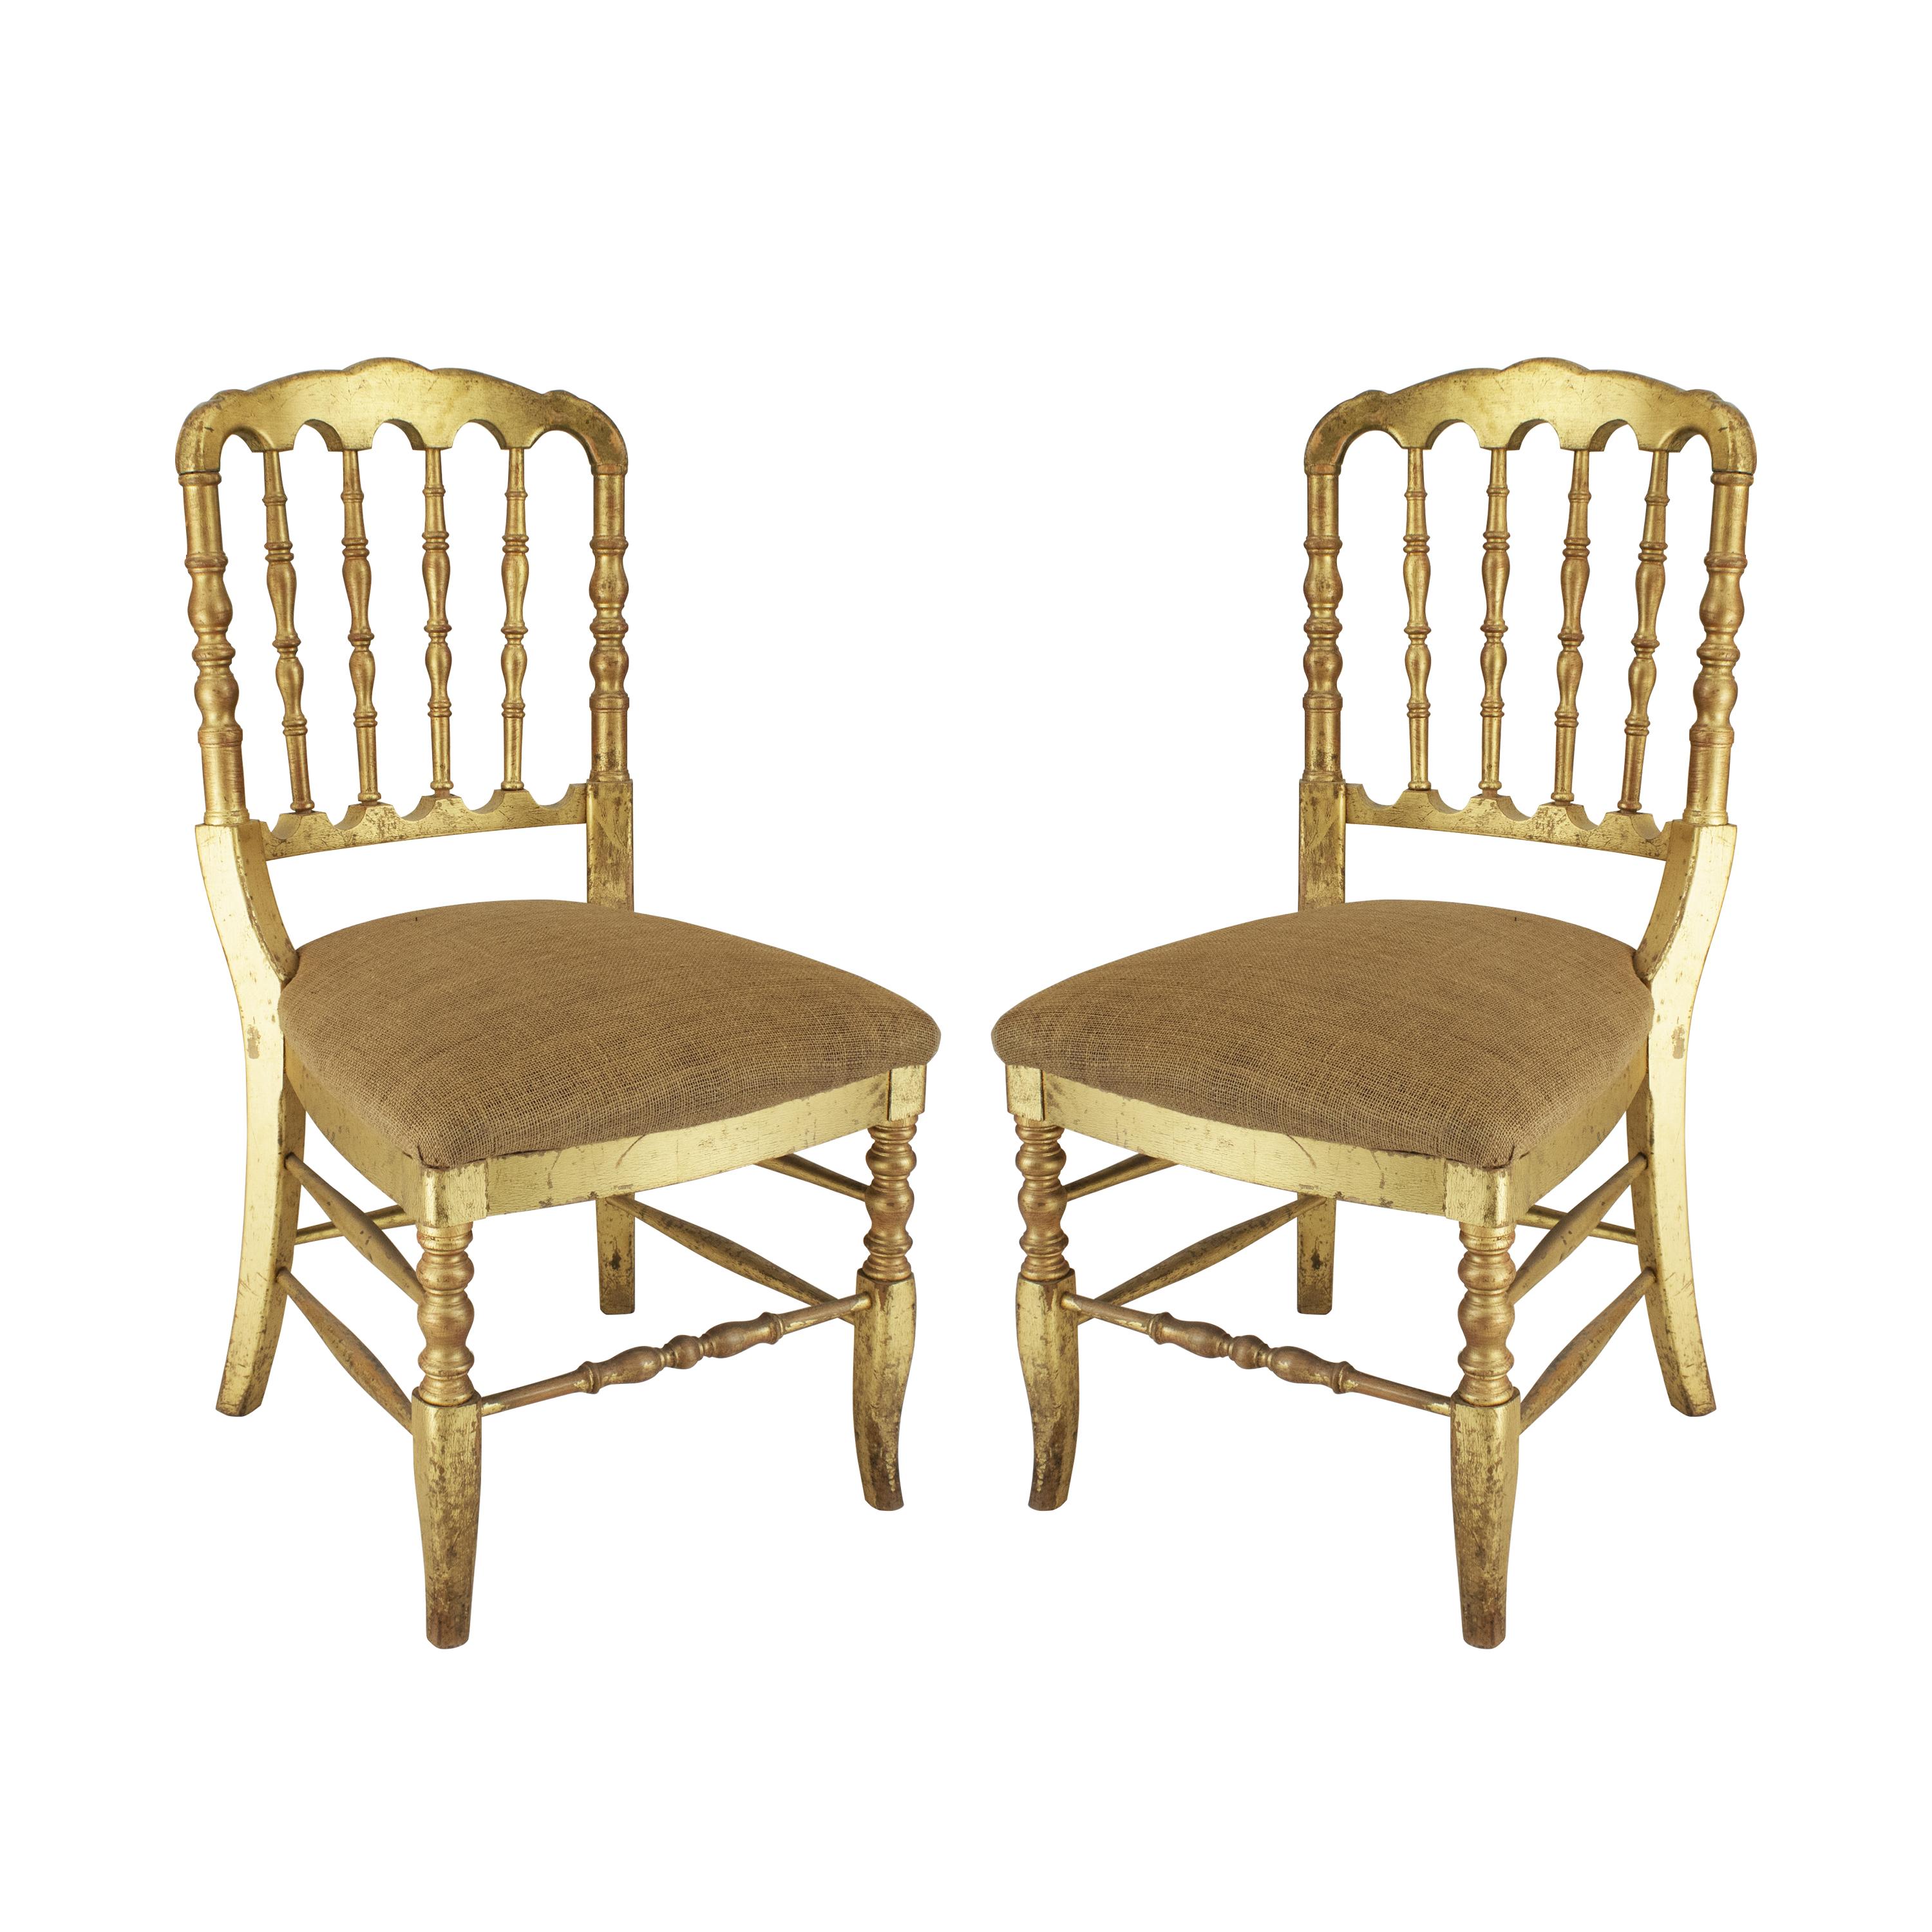 Mid-20th Century Set of 12 Gold Leaf Tiffany, Chiavari Style Chairs, France, 1960s For Sale